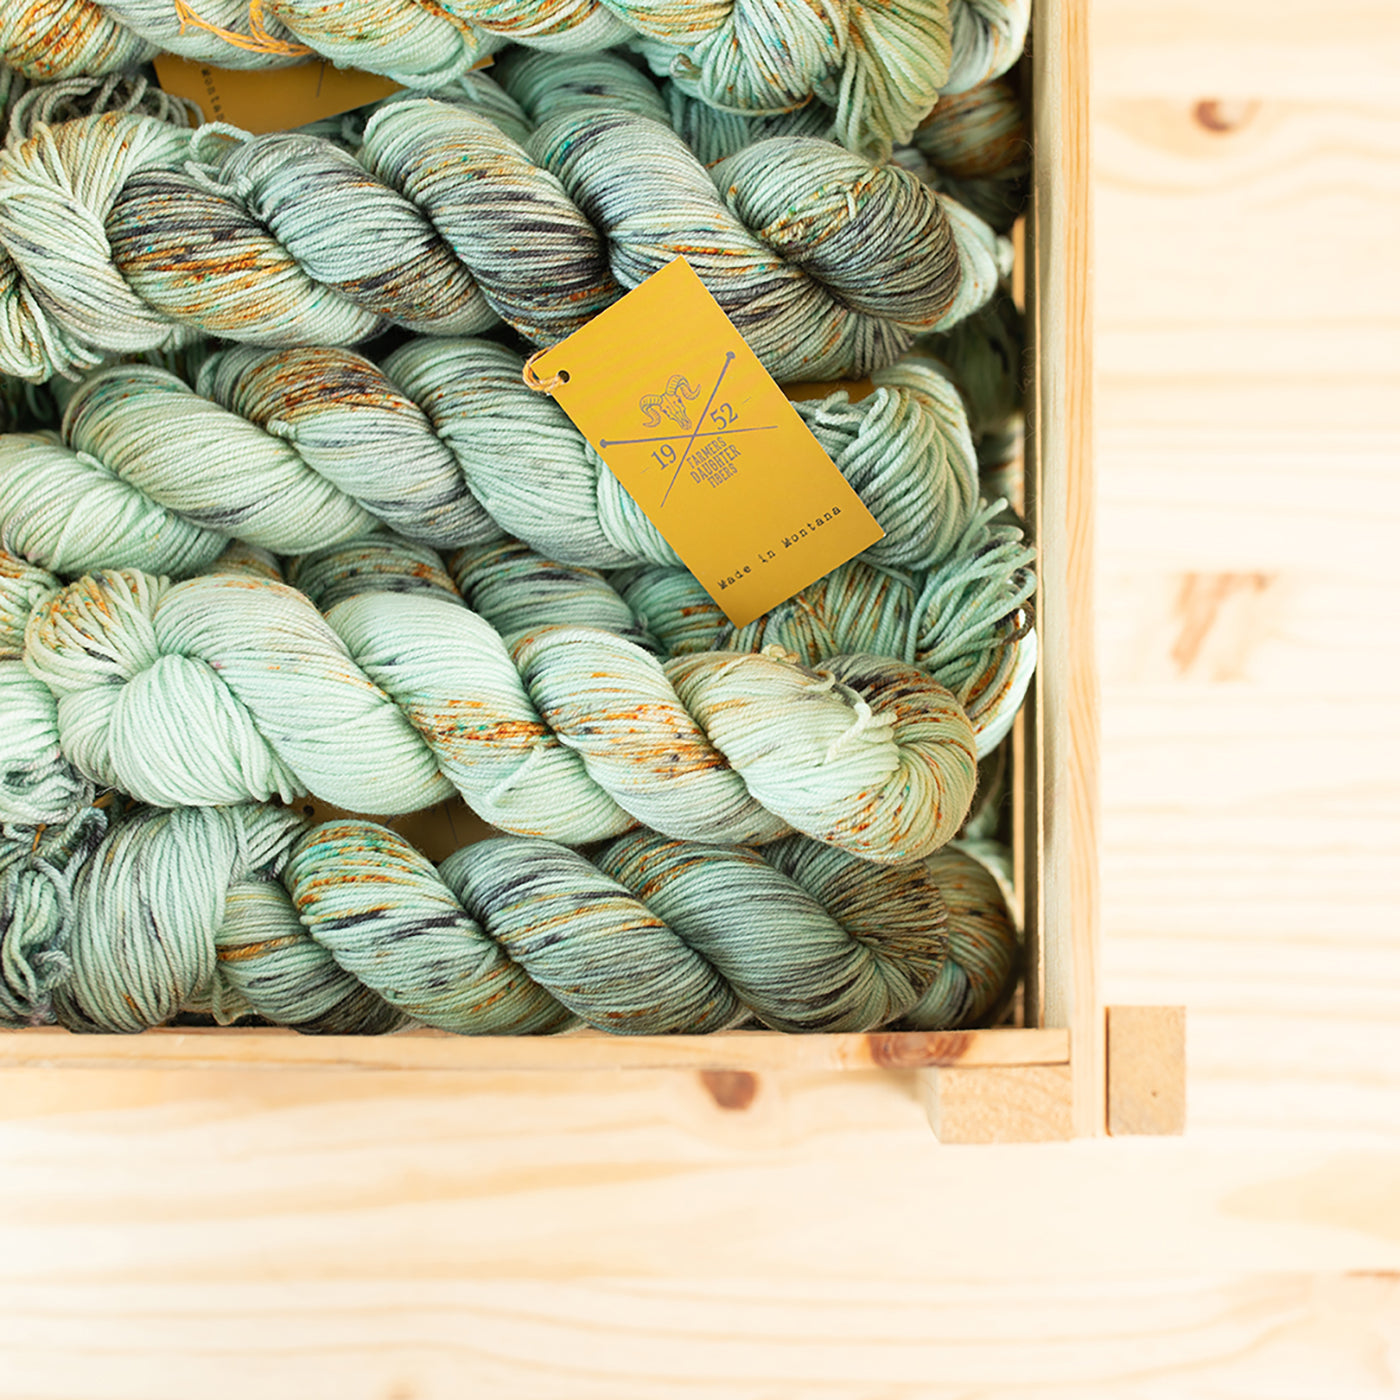 This is an image of a wooden box full of mint colored yarn. 